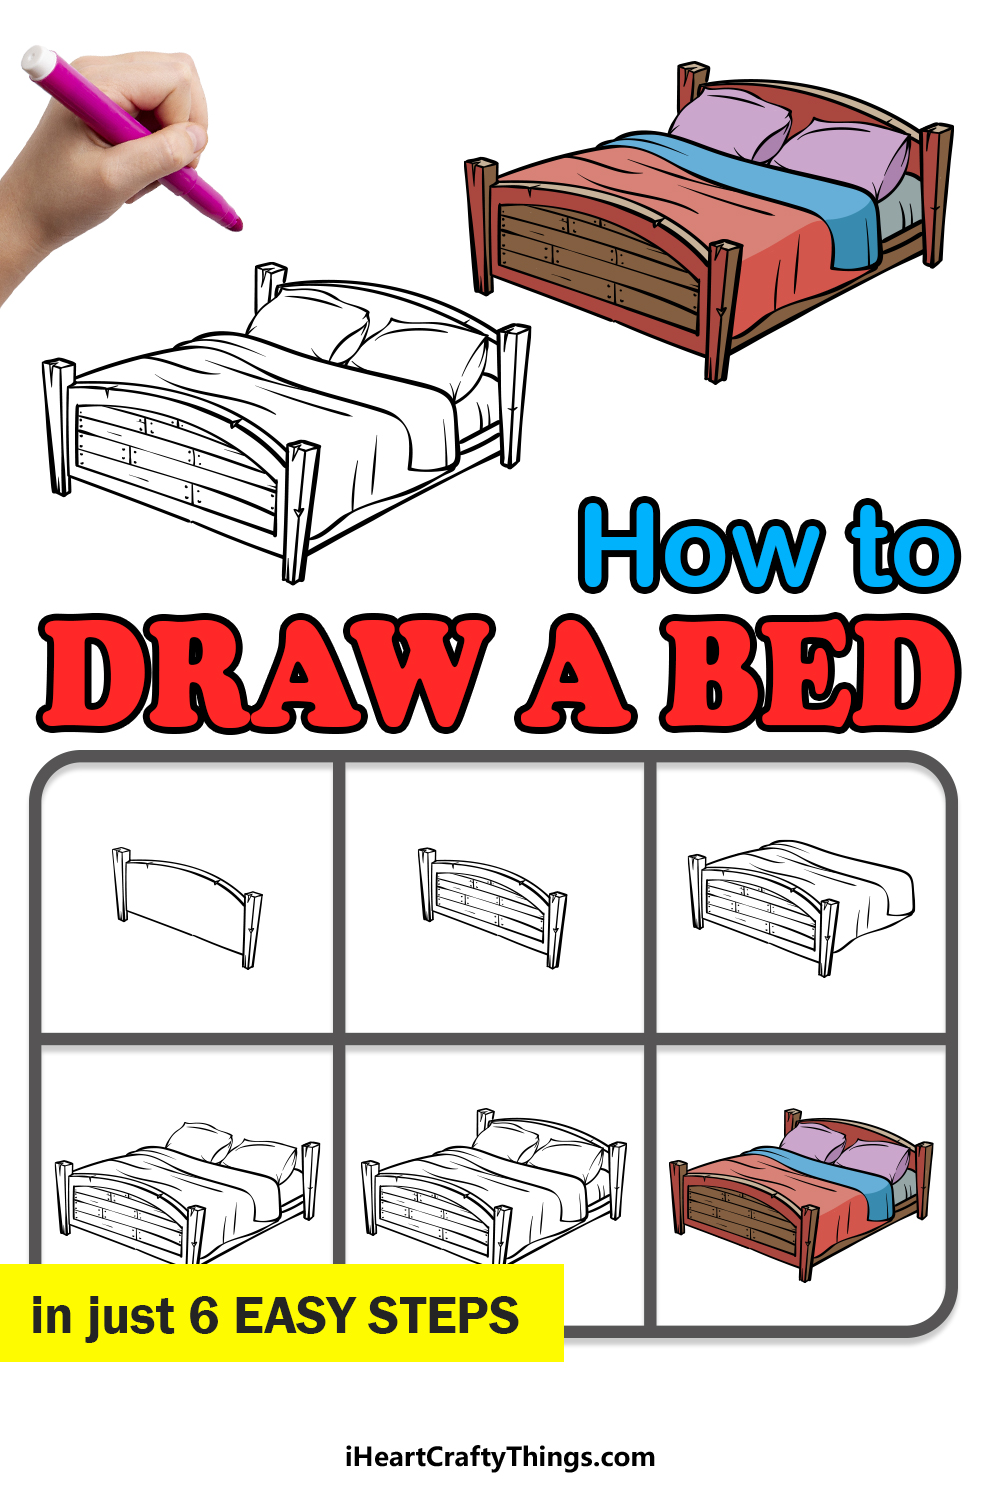 how to draw a bed in 6 easy steps